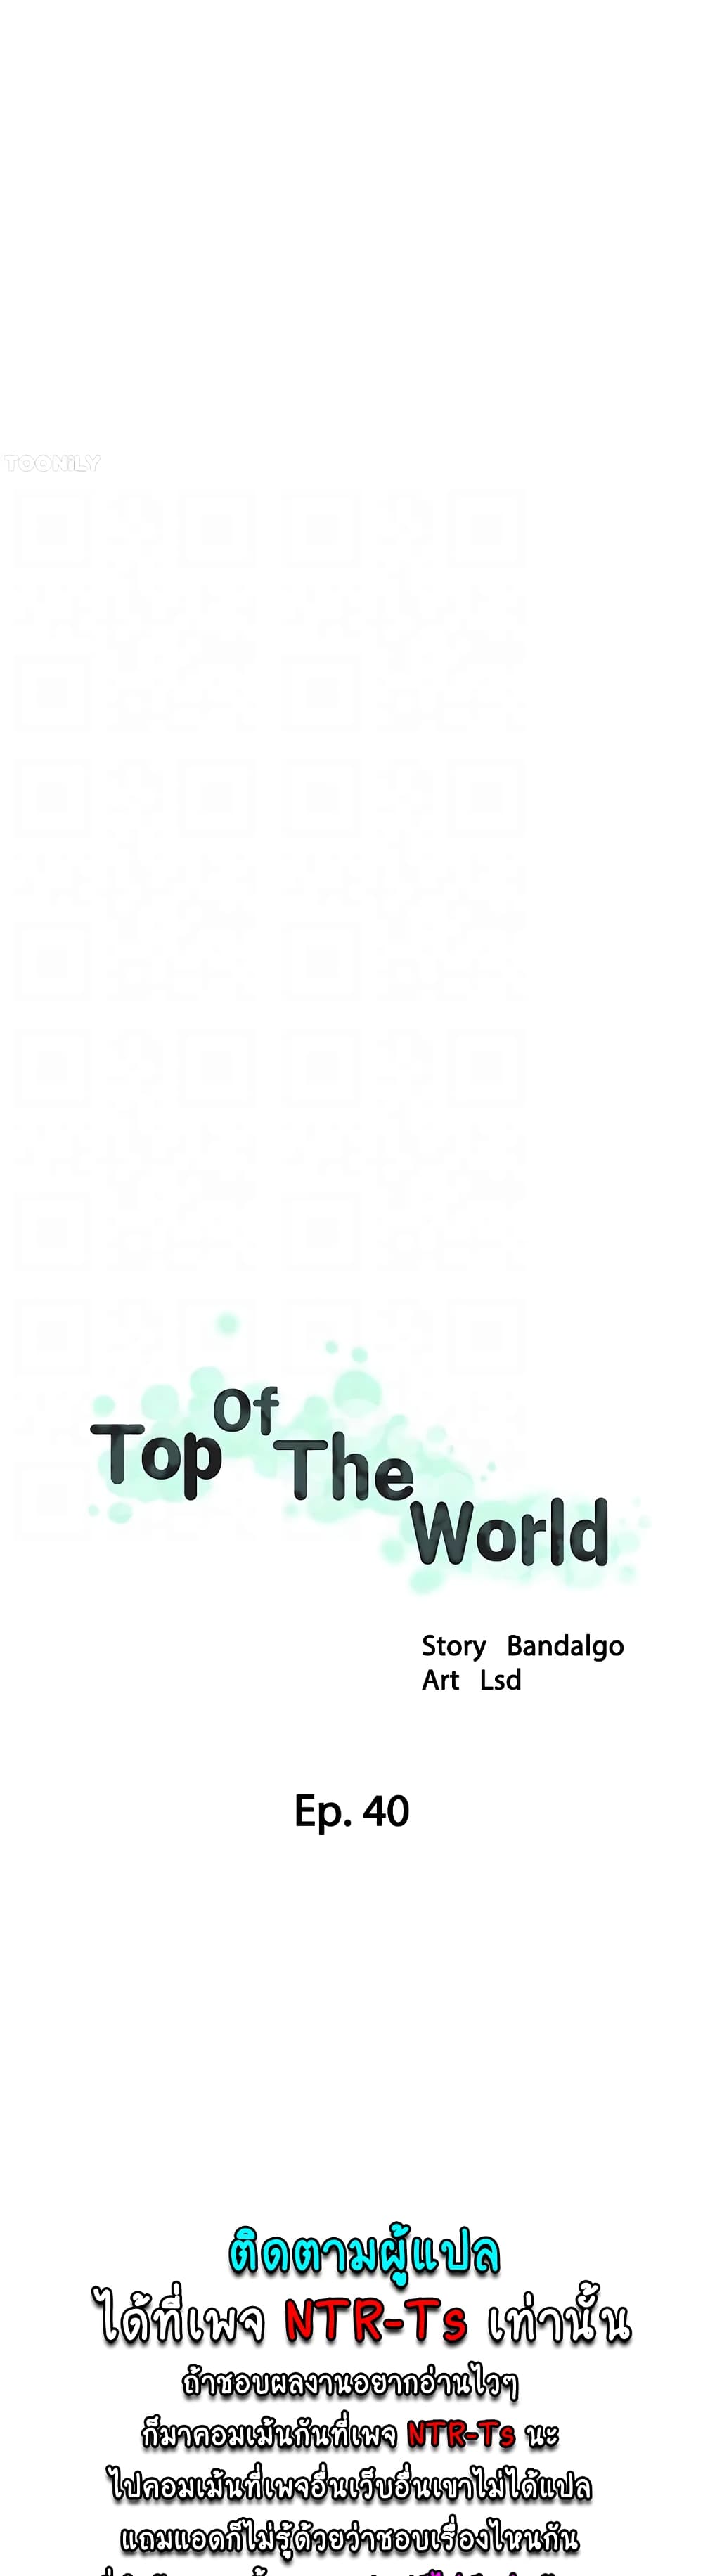 Top Of The World 40-40